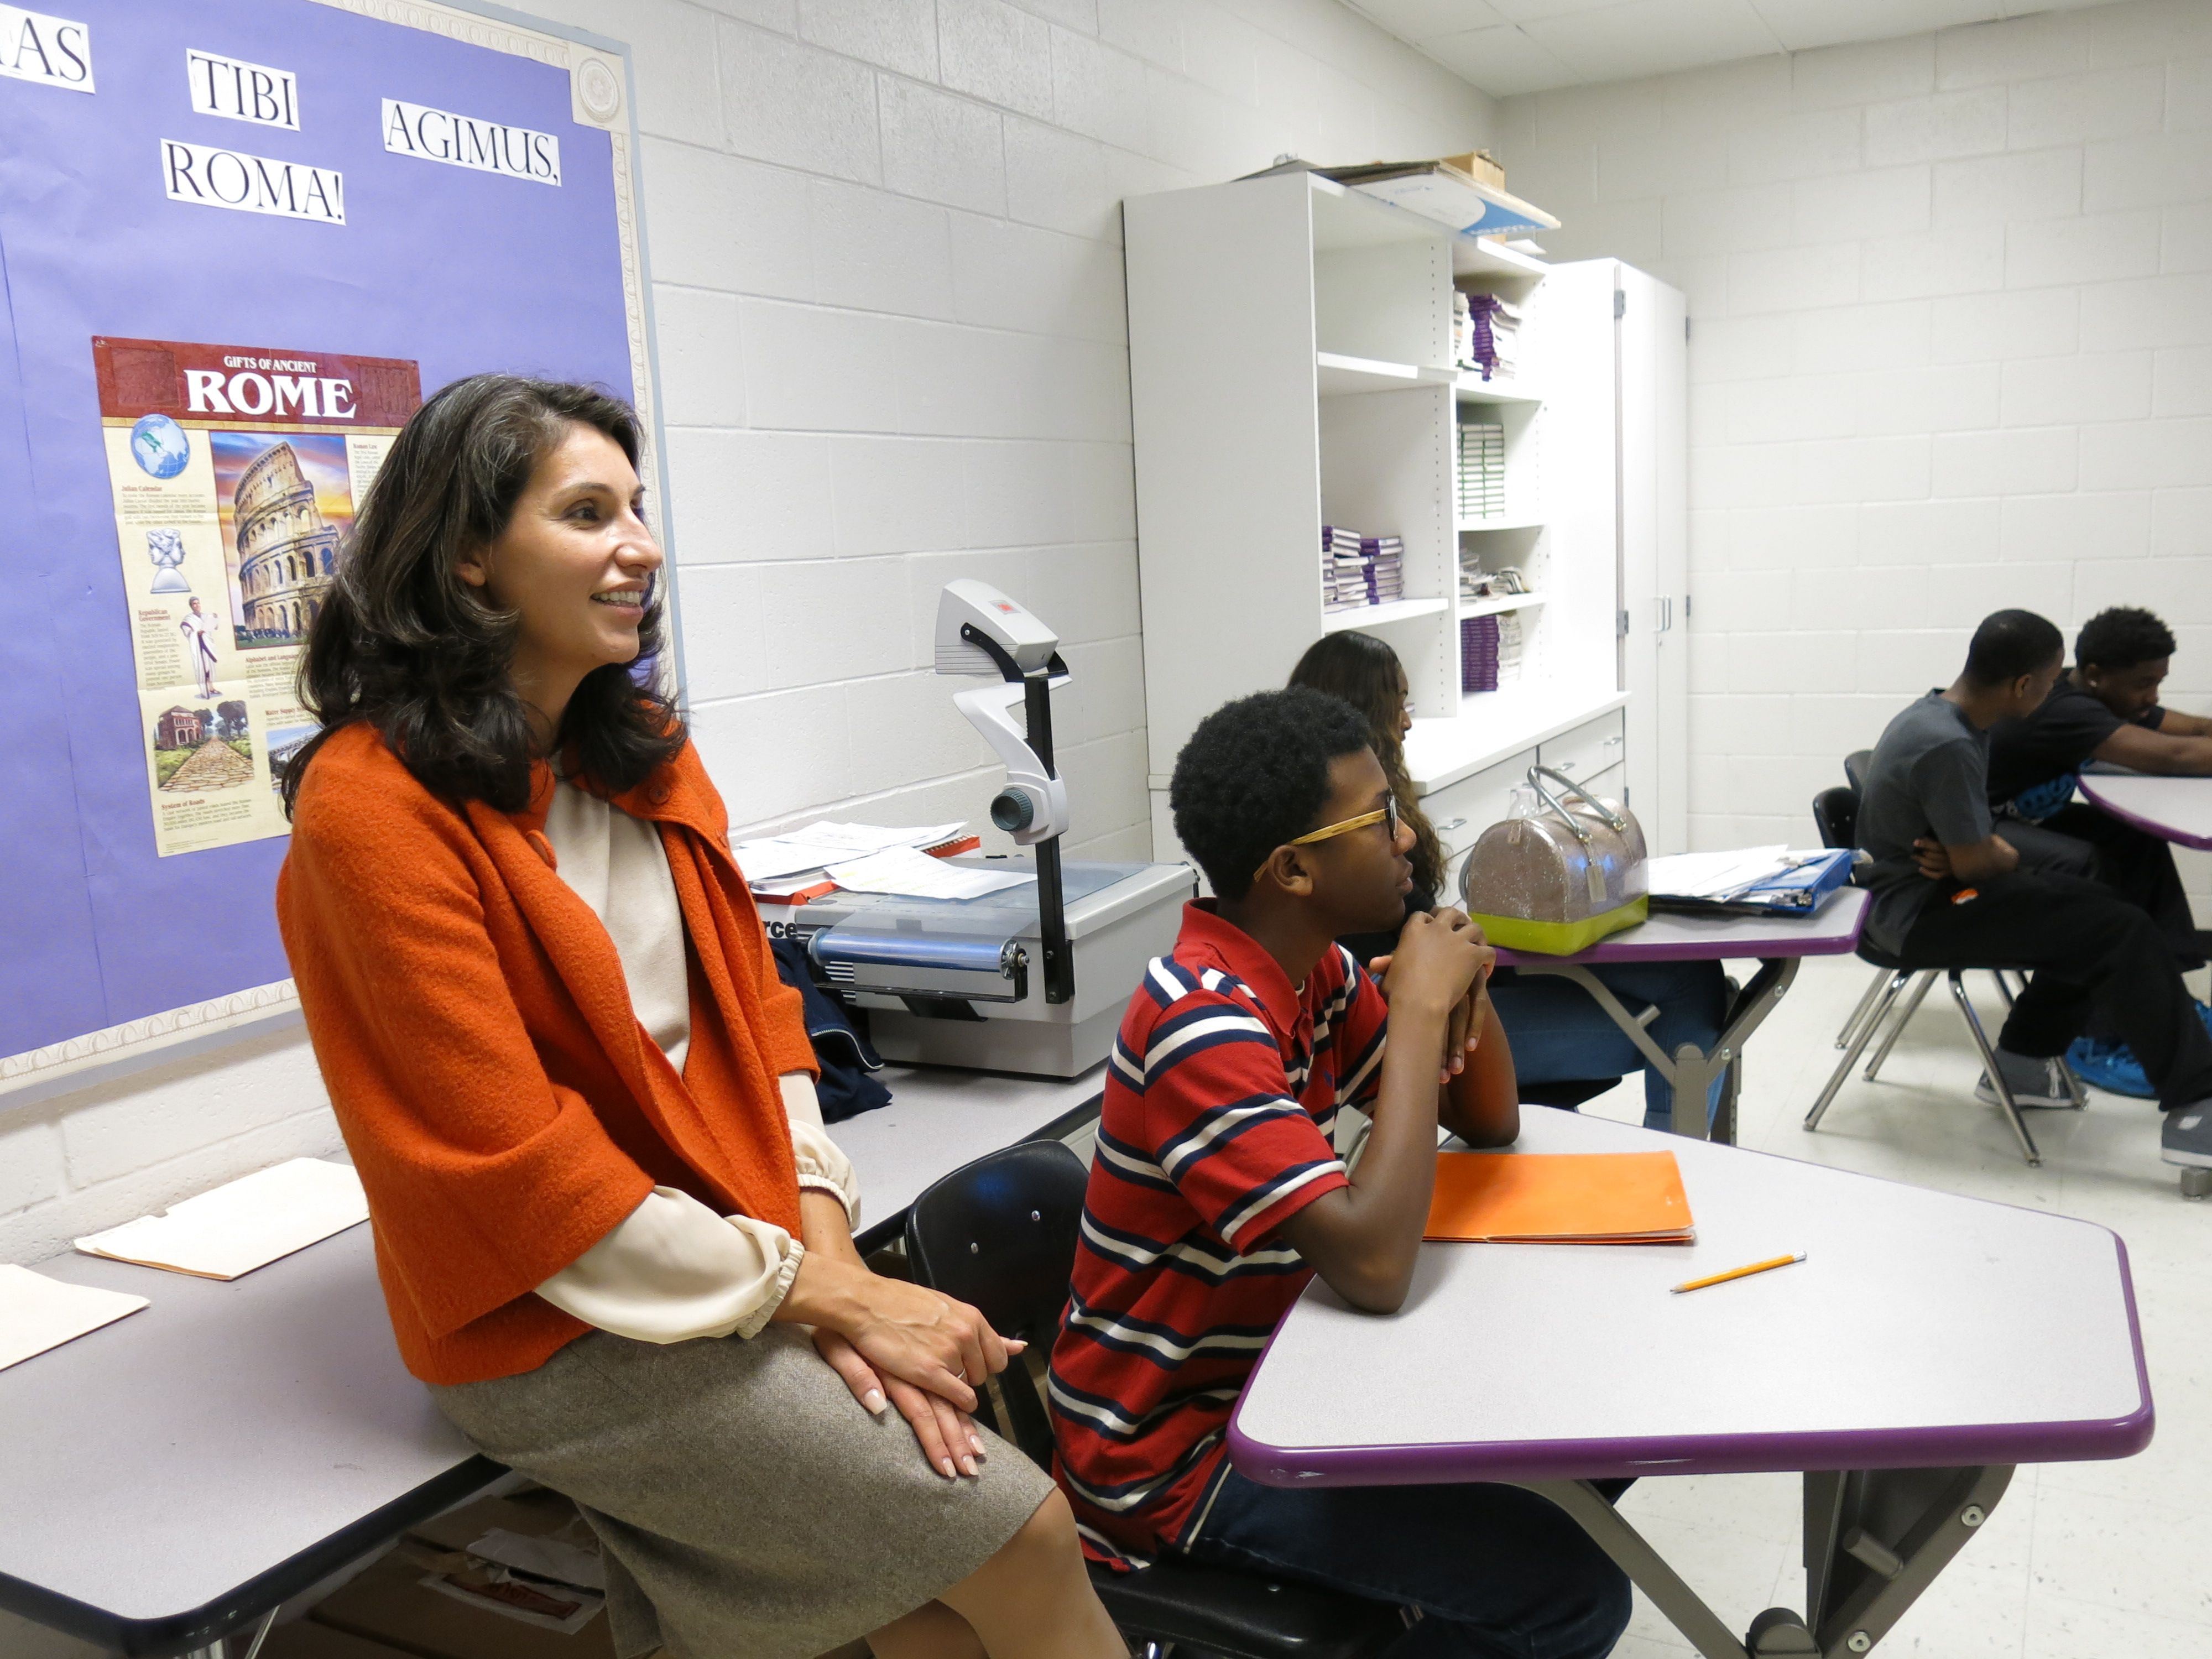 Heidi Ramirez, in an orange sweater and slacks, leans against a table at the back of a high school classroom while students sit at desks, on a visit in 2014 to Southwind High School in Memphis.